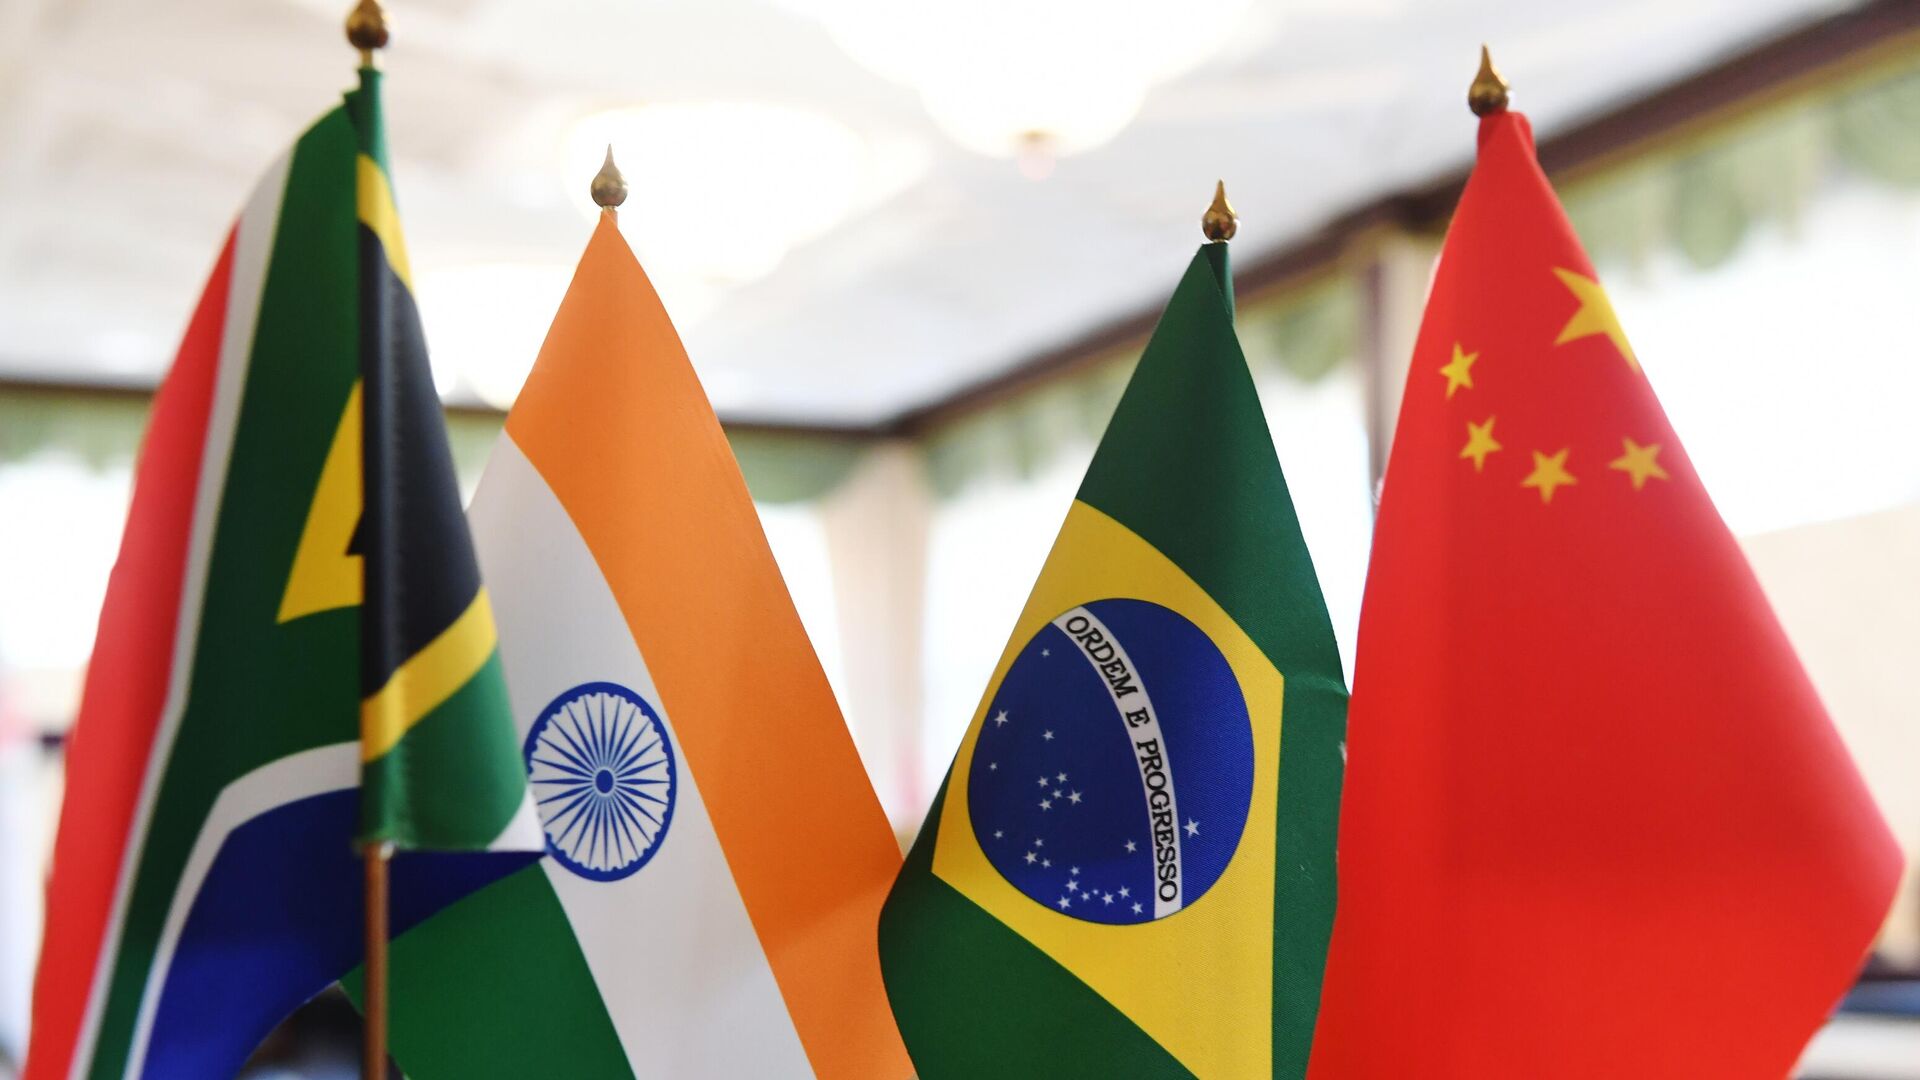 Flags of the BRICS countries: South Africa, India, Brazil and China. - Sputnik International, 1920, 18.04.2023